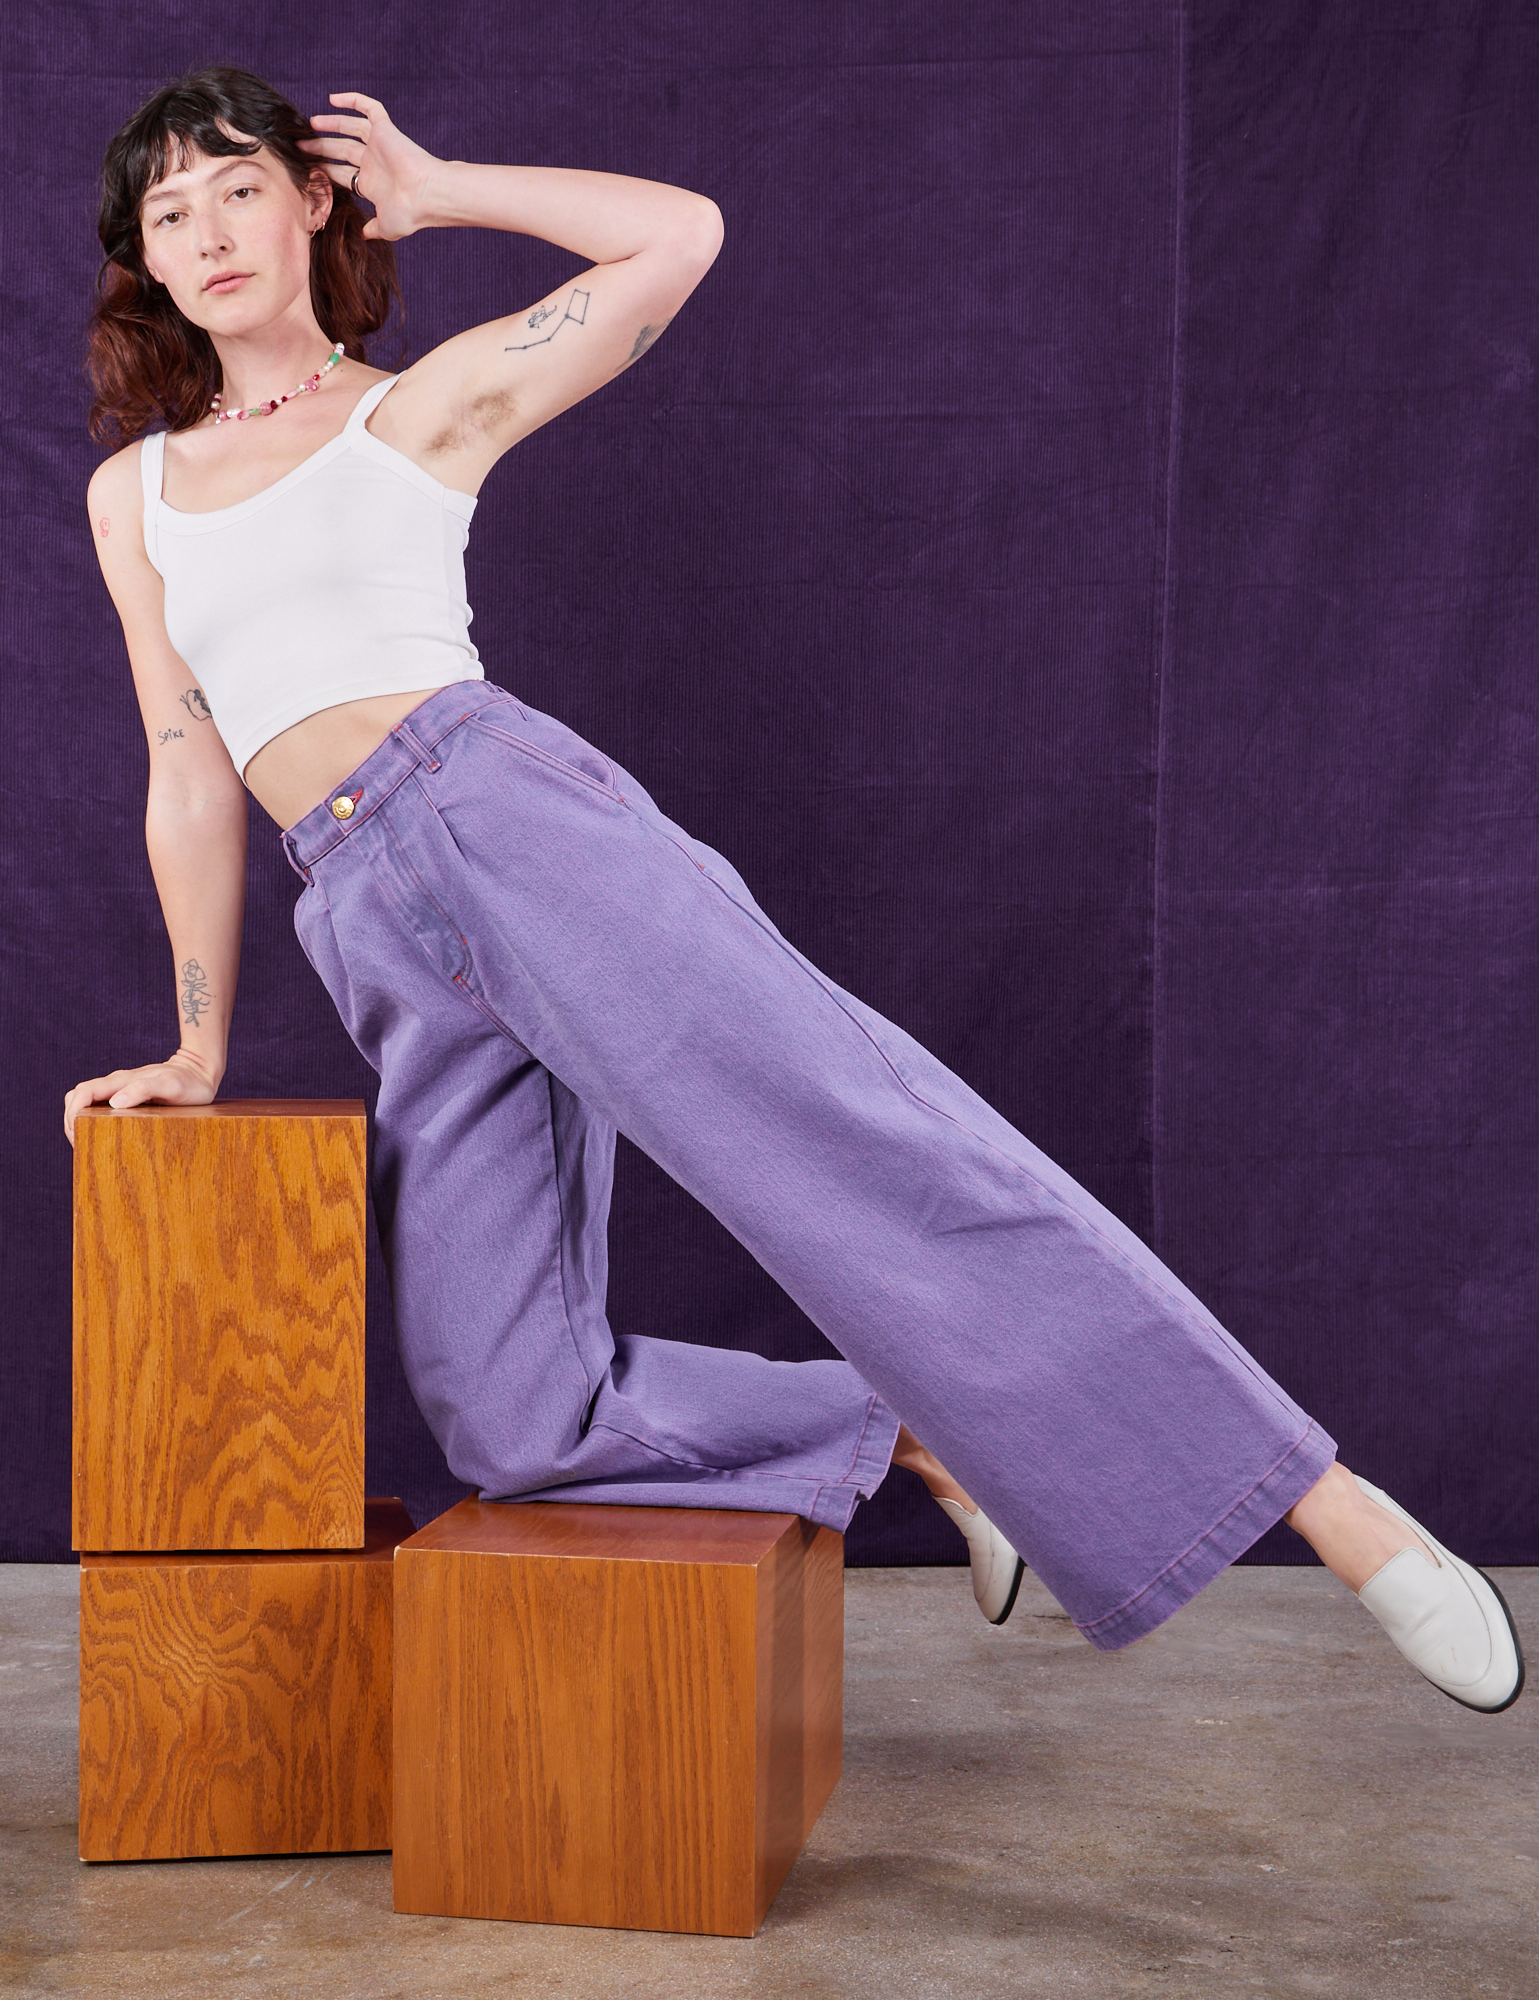 Alex is wearing Overdyed Wide Leg Trousers in Faded Grape and vintage off-white Cami